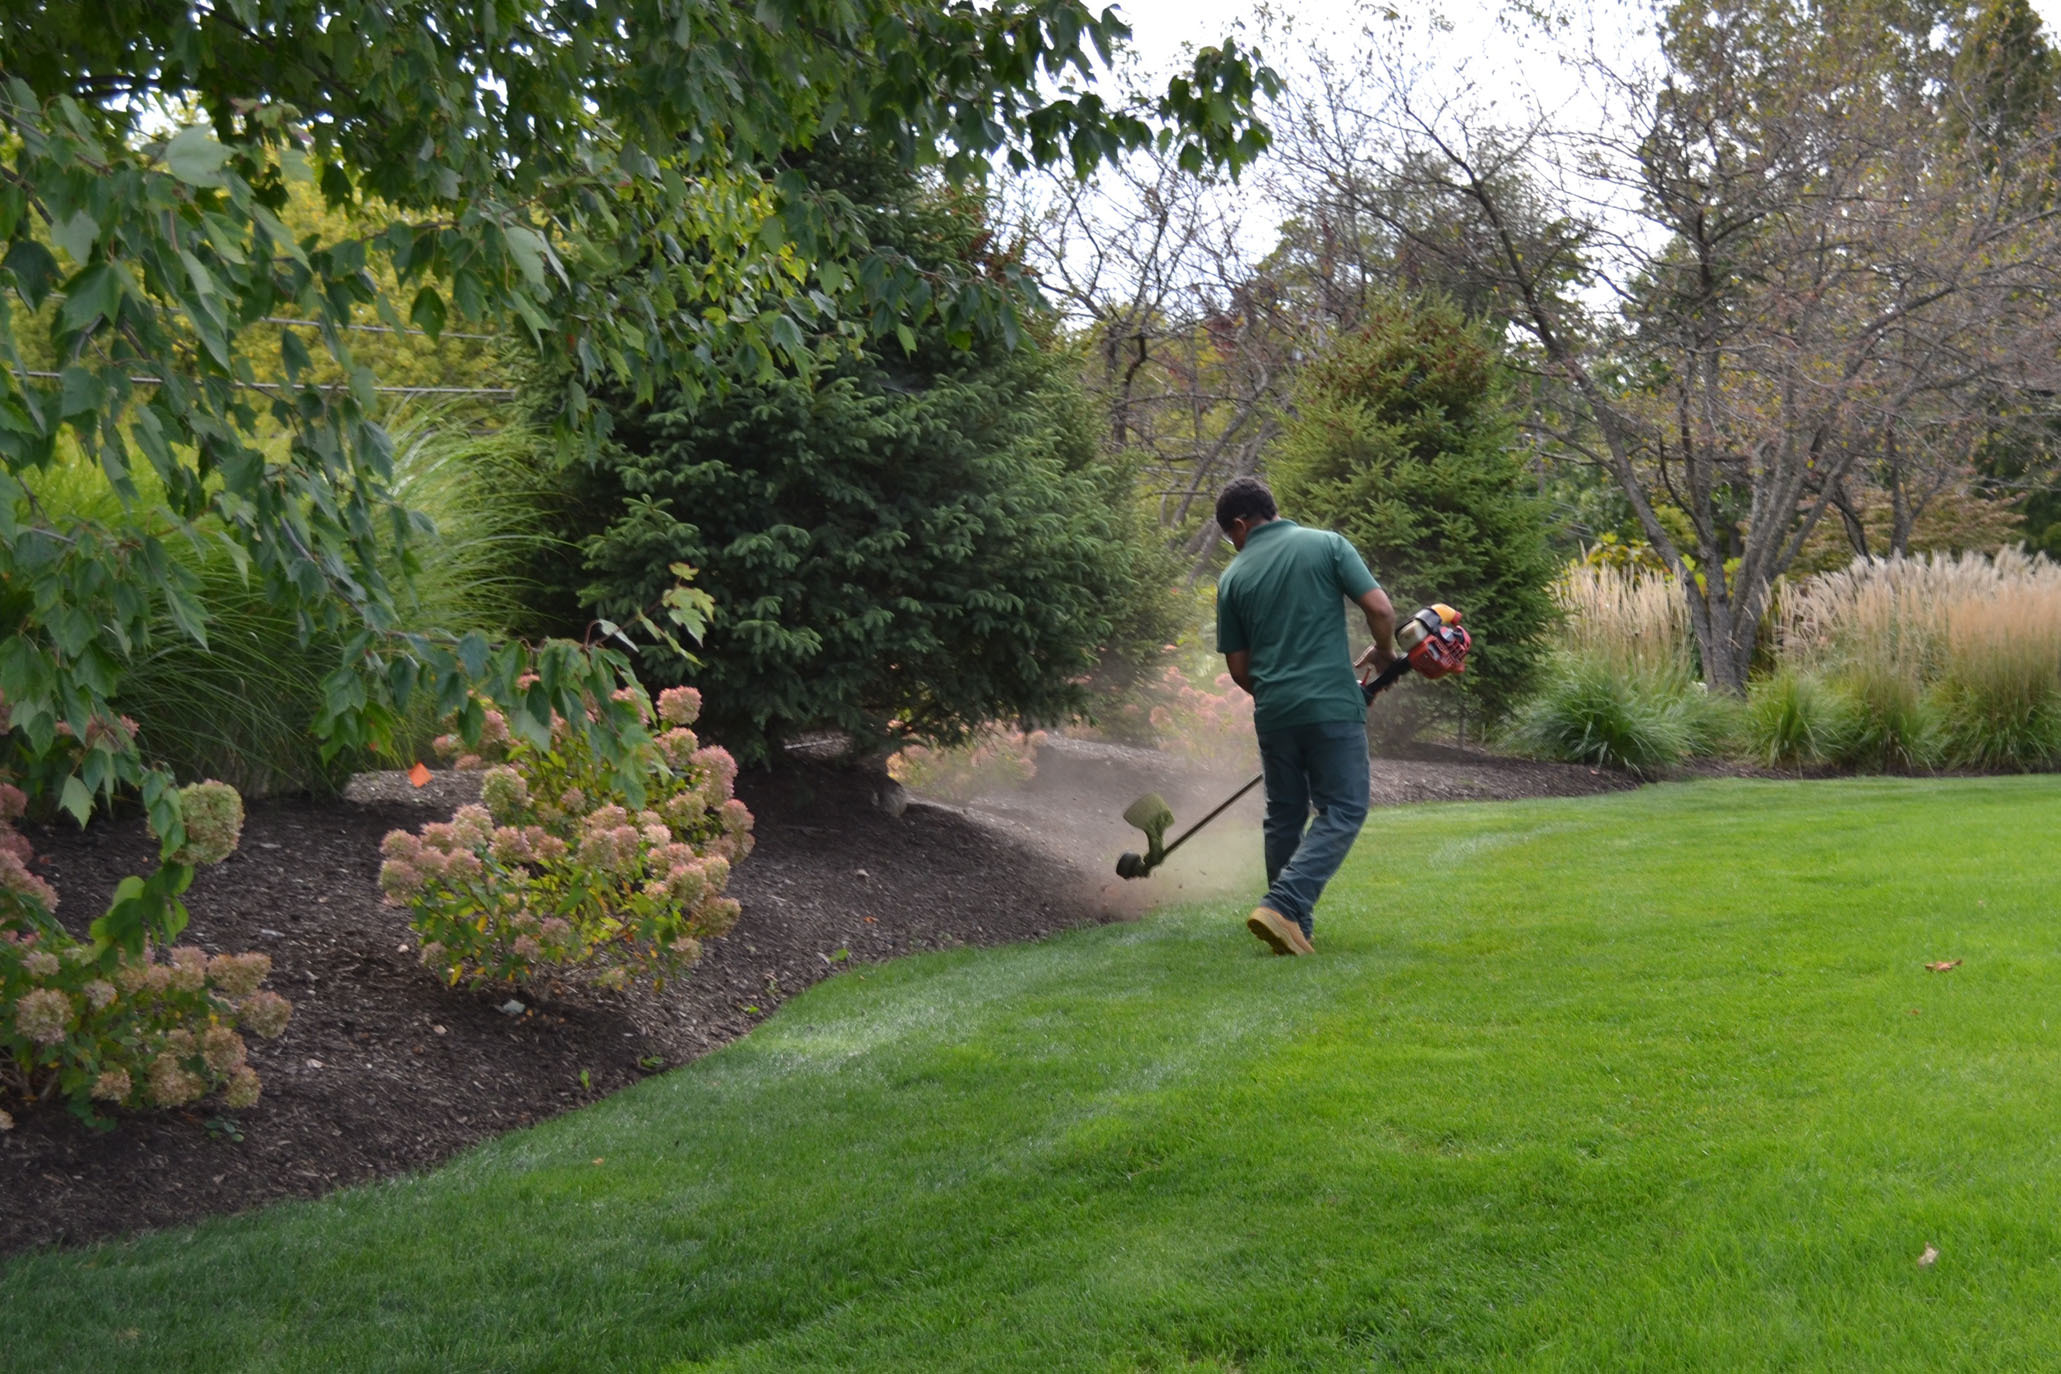 Professional landscaping company handling residential landscaping services and maintenance